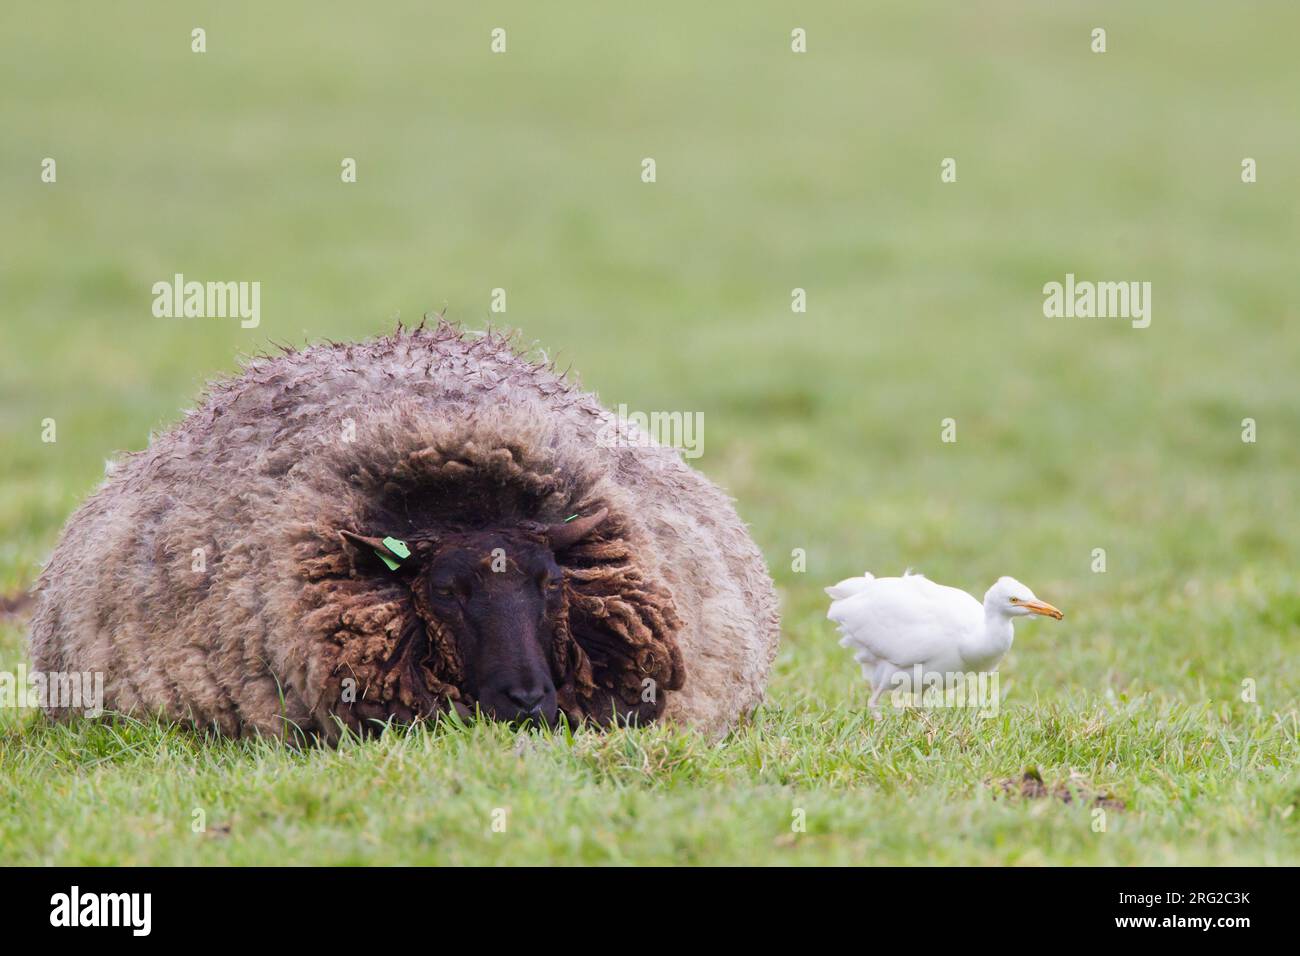 Winter plumaged Cattle Egret (Bubulcus ibis) foraging in a Dutch meadow next to a domestic sheep. Stock Photo